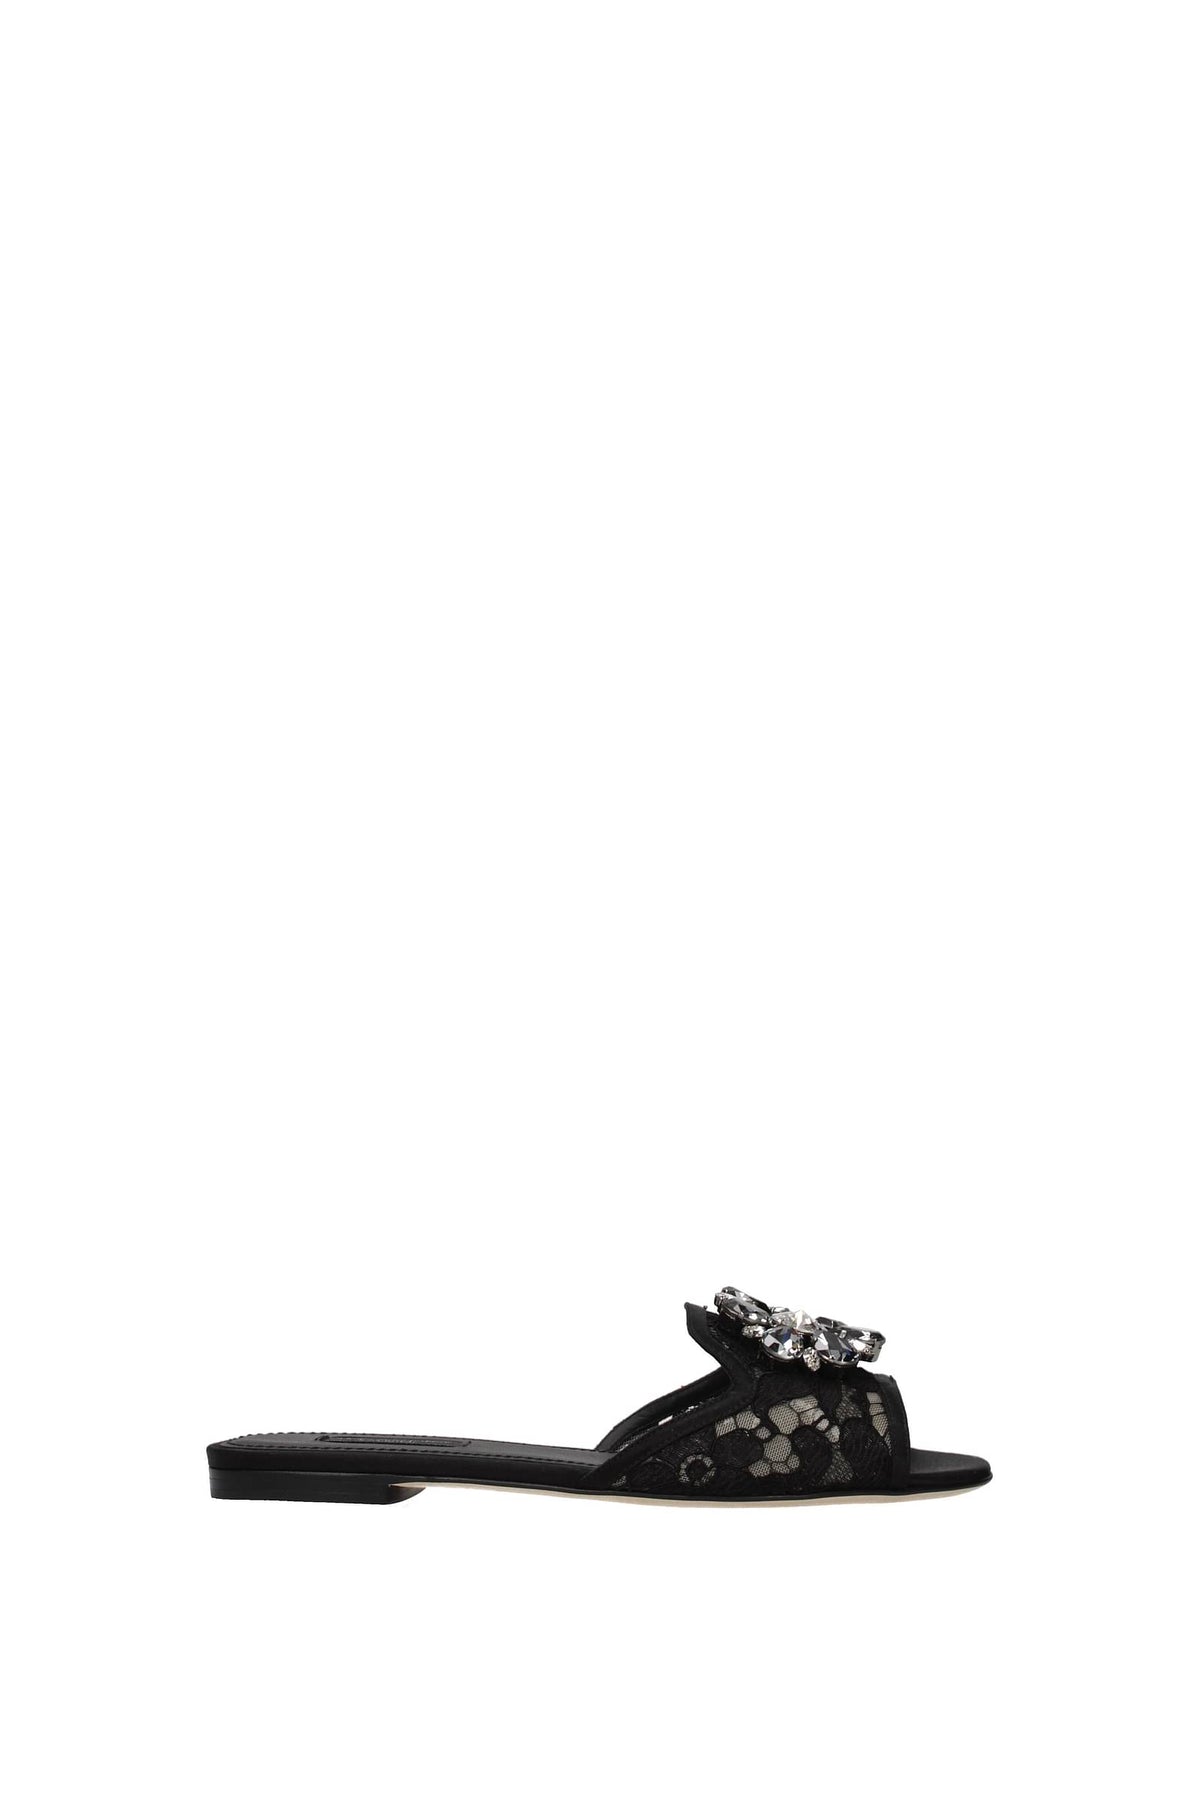 DOLCE & GABBANA SLIPPERS AND CLOGS LACE BLACK